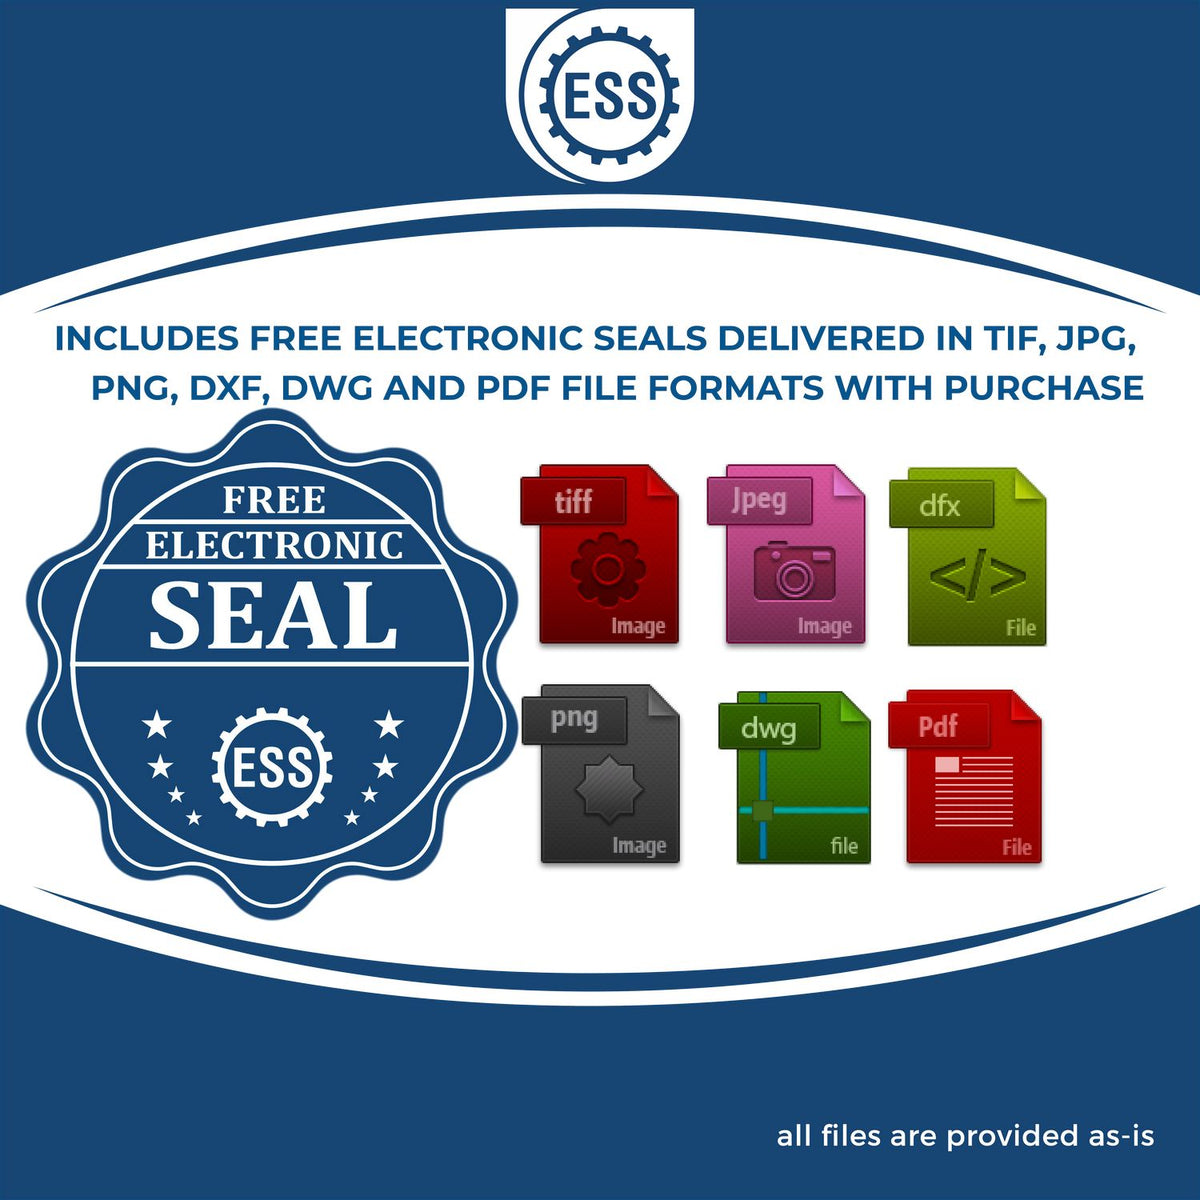 An infographic for the free electronic seal for the State of Kentucky Long Reach Architectural Embossing Seal illustrating the different file type icons such as DXF, DWG, TIF, JPG and PNG.